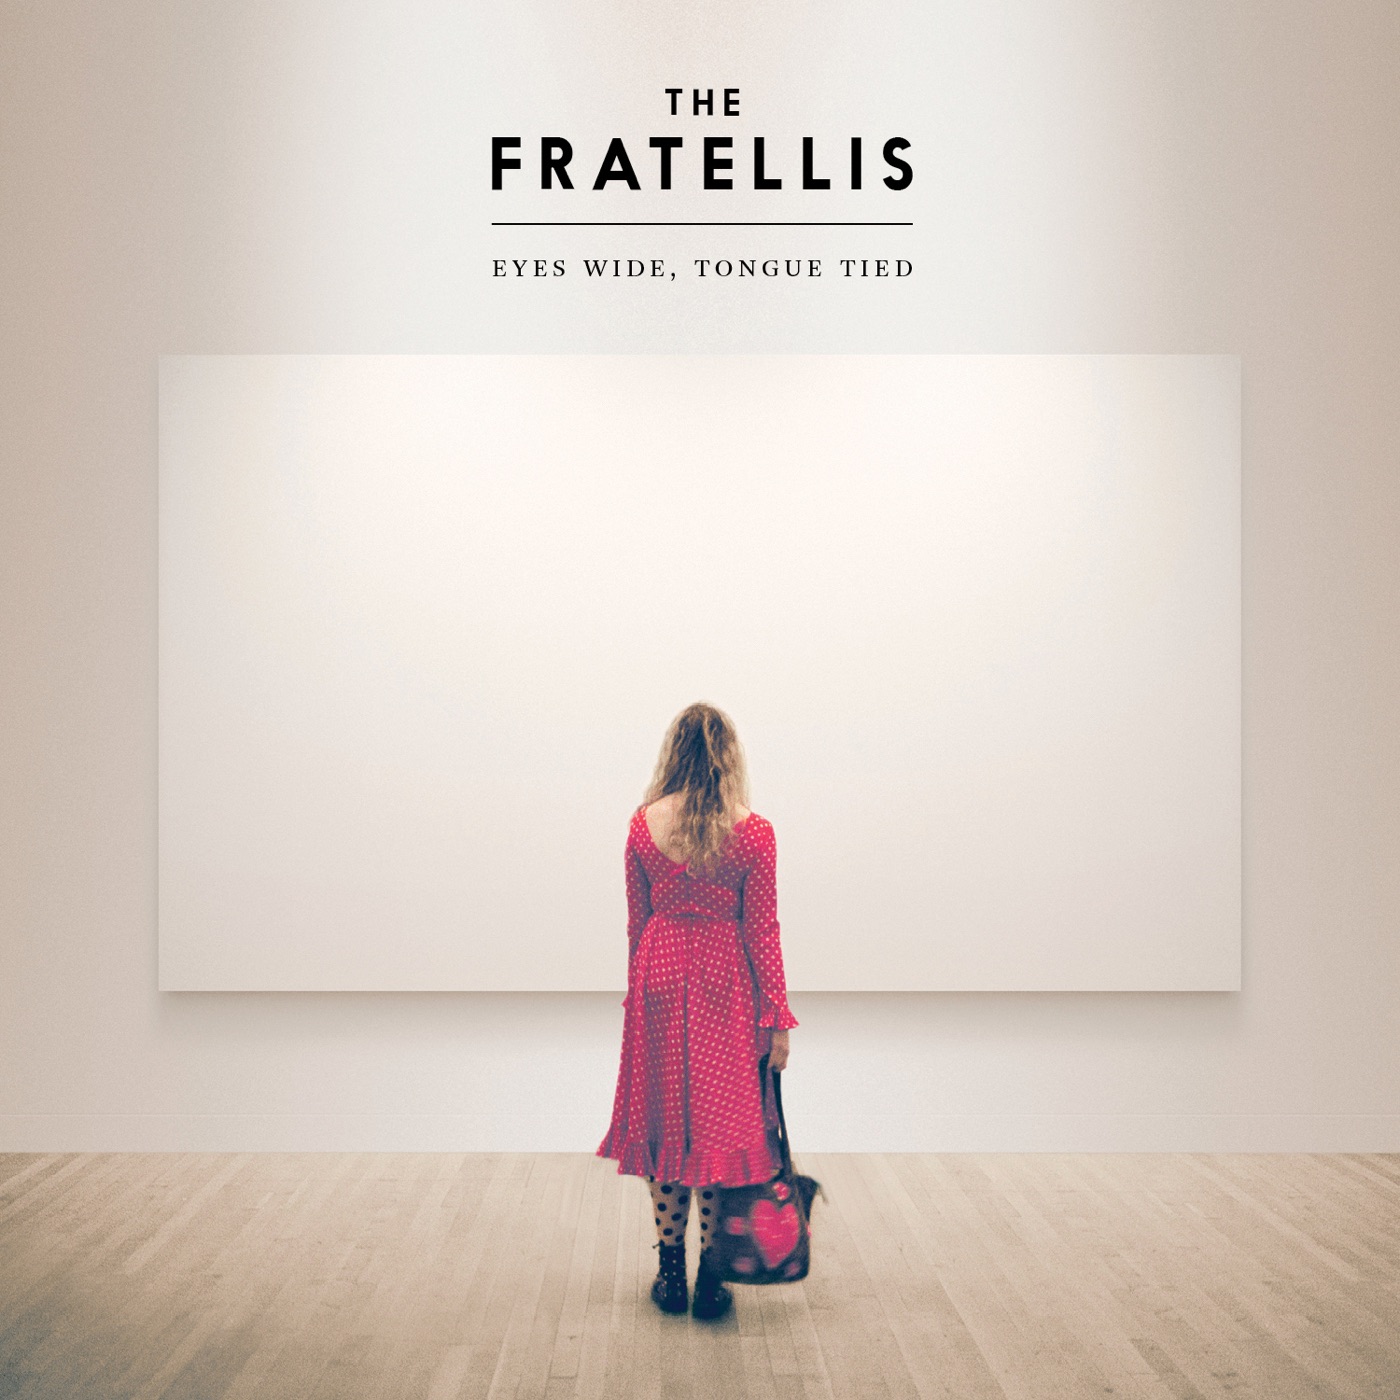 Eyes Wide, Tongue Tied by The Fratellis